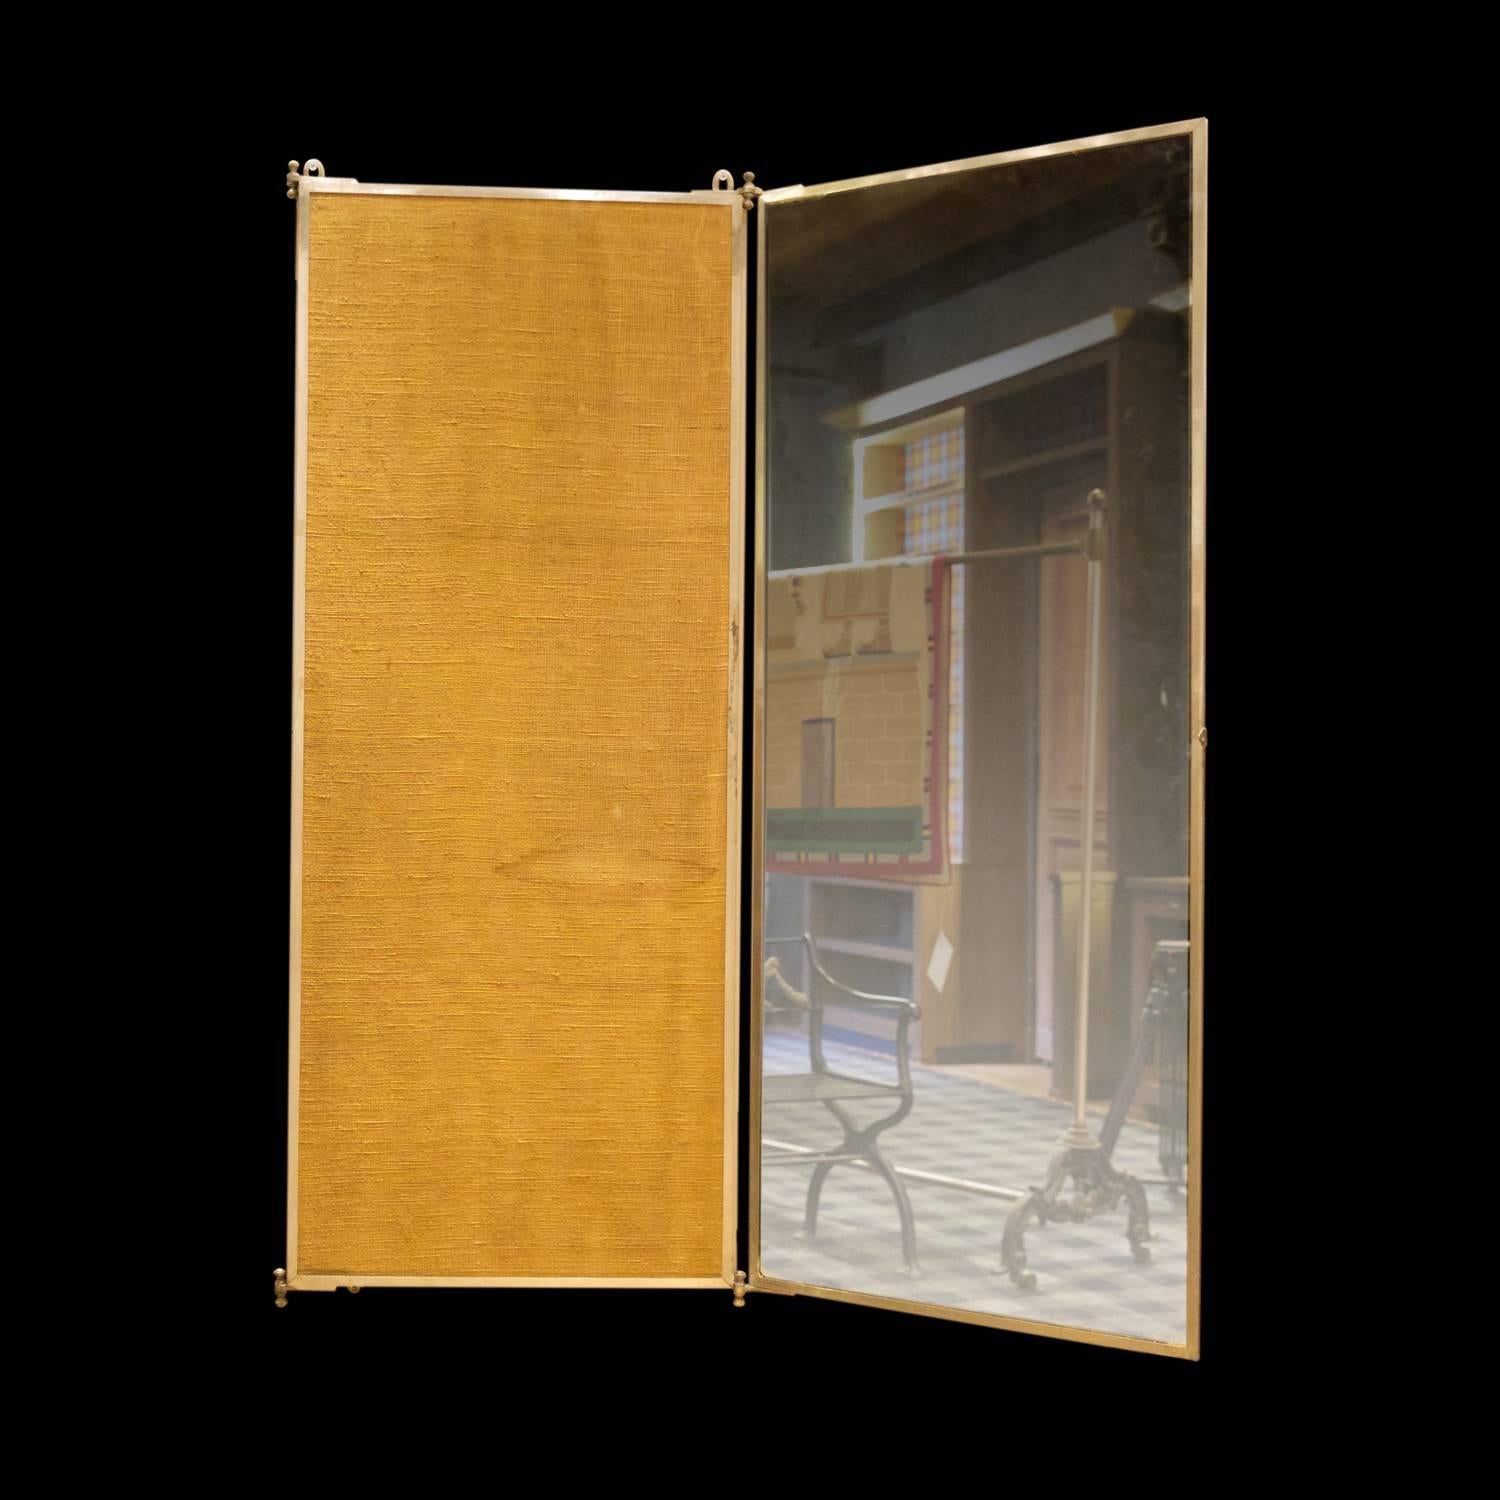 Early 20th century French triptych mirror. This wall hung mirror is made of nickel-plated brass and signed 'Miroir Brot'. It completely folds in, revealing a mustard colored woven linen backing.

Measures: 66" L x 55" H.

 